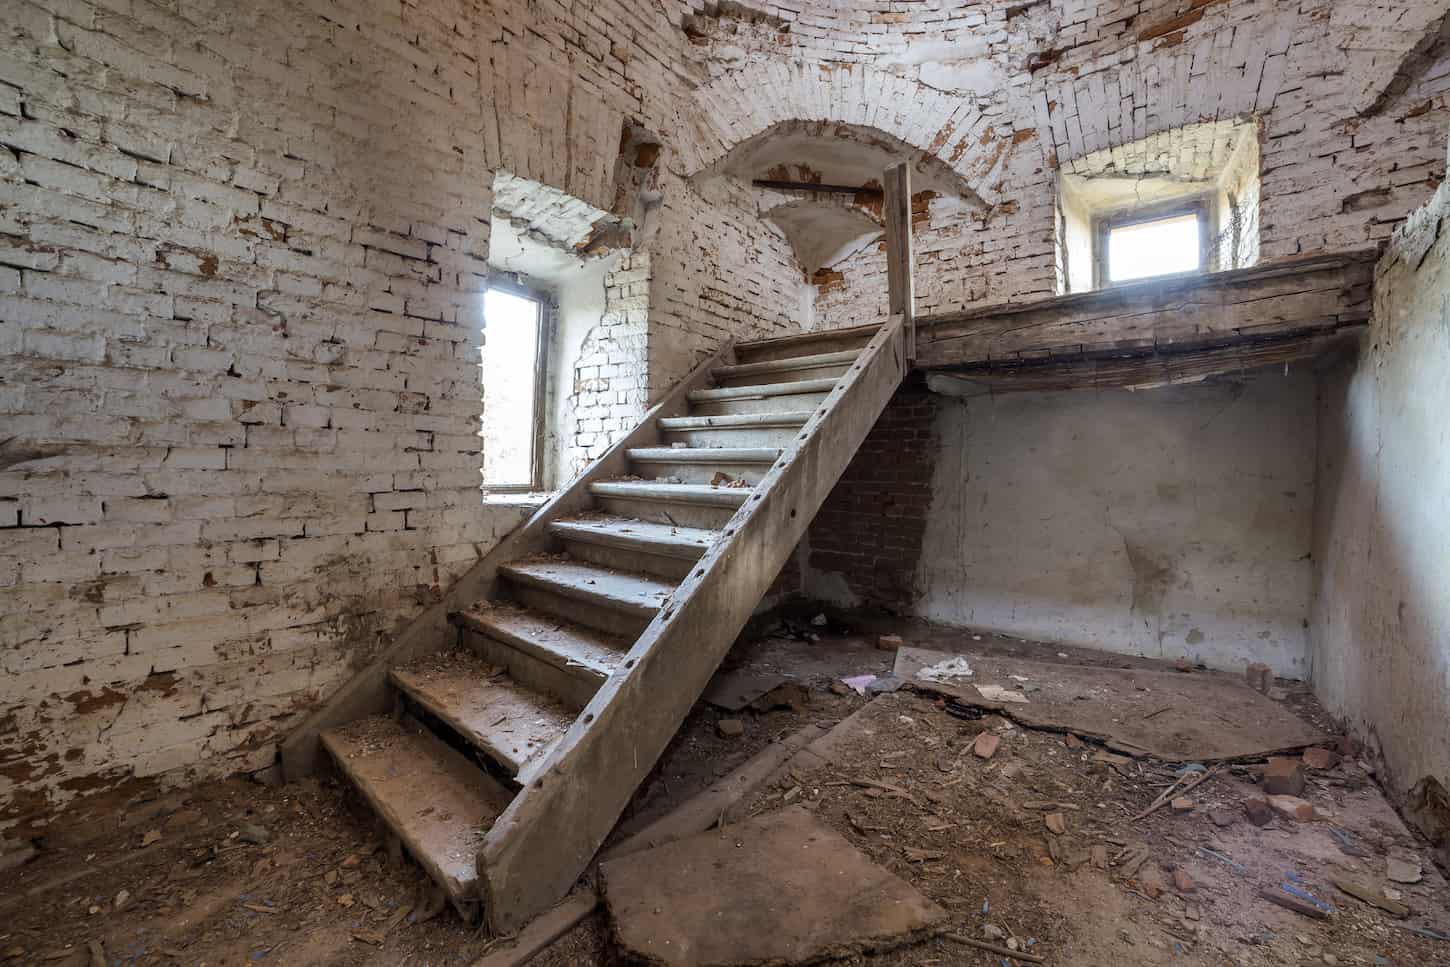 An image of a Large spacious forsaken empty basement room of an ancient building or palace with cracked plastered brick walls, small windows, a dirty floor, and a wooden staircase ladder.